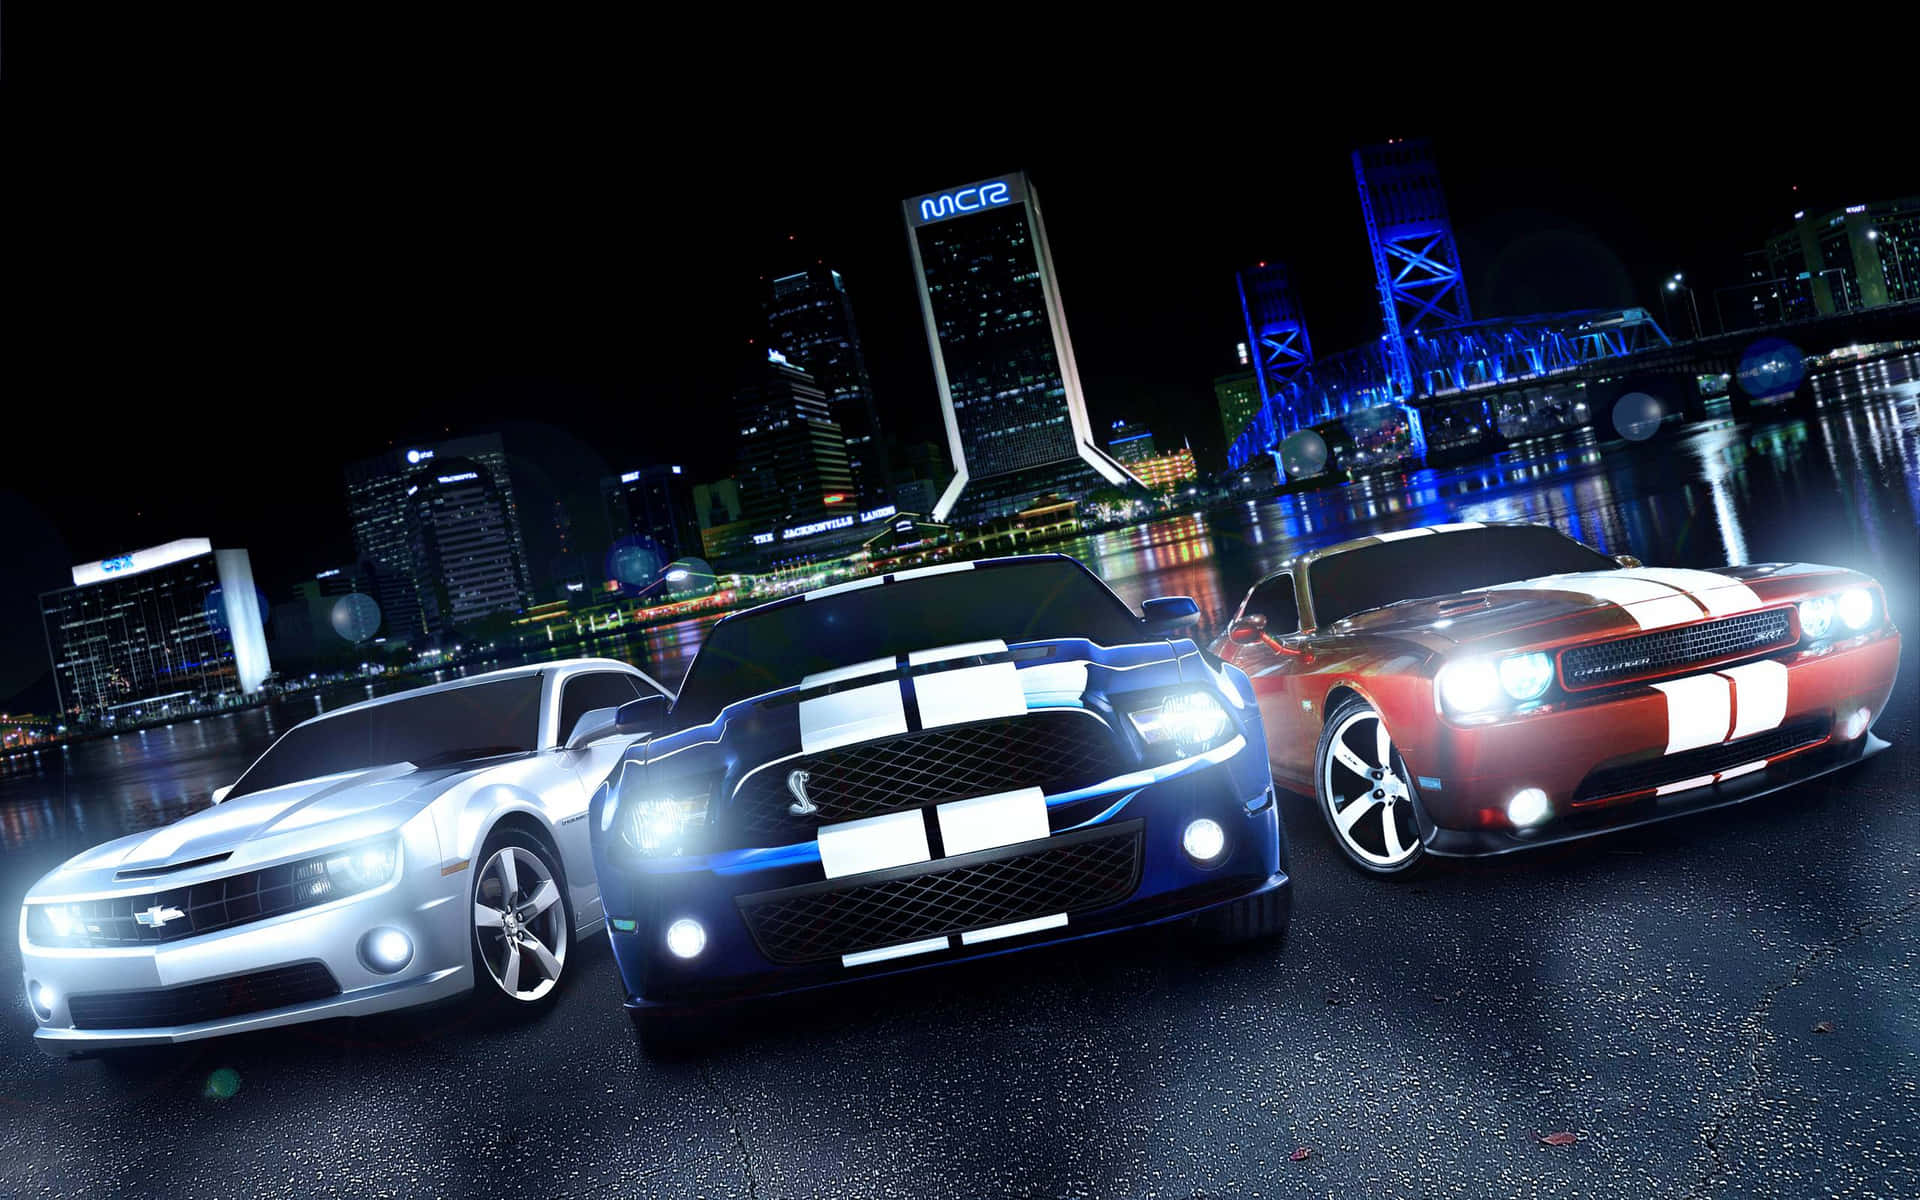 Three Cars In The City At Night